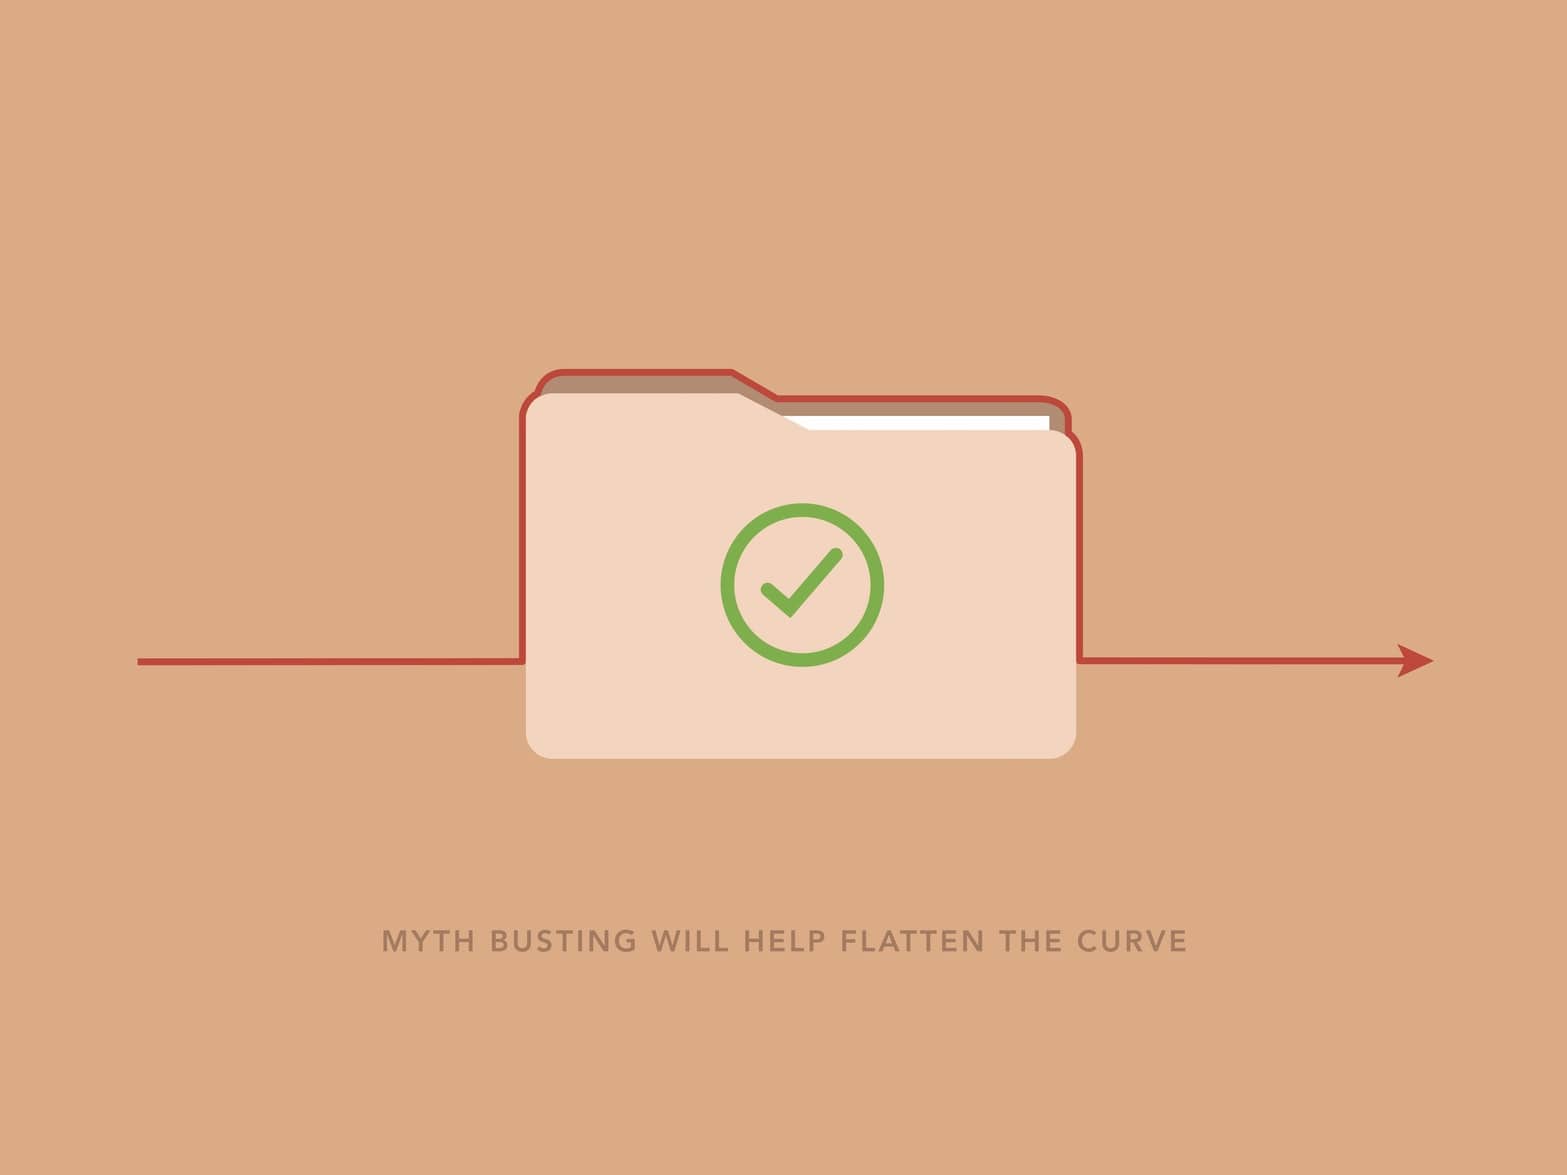 Illustration of computer folder and text - myth busting can flatten the curve